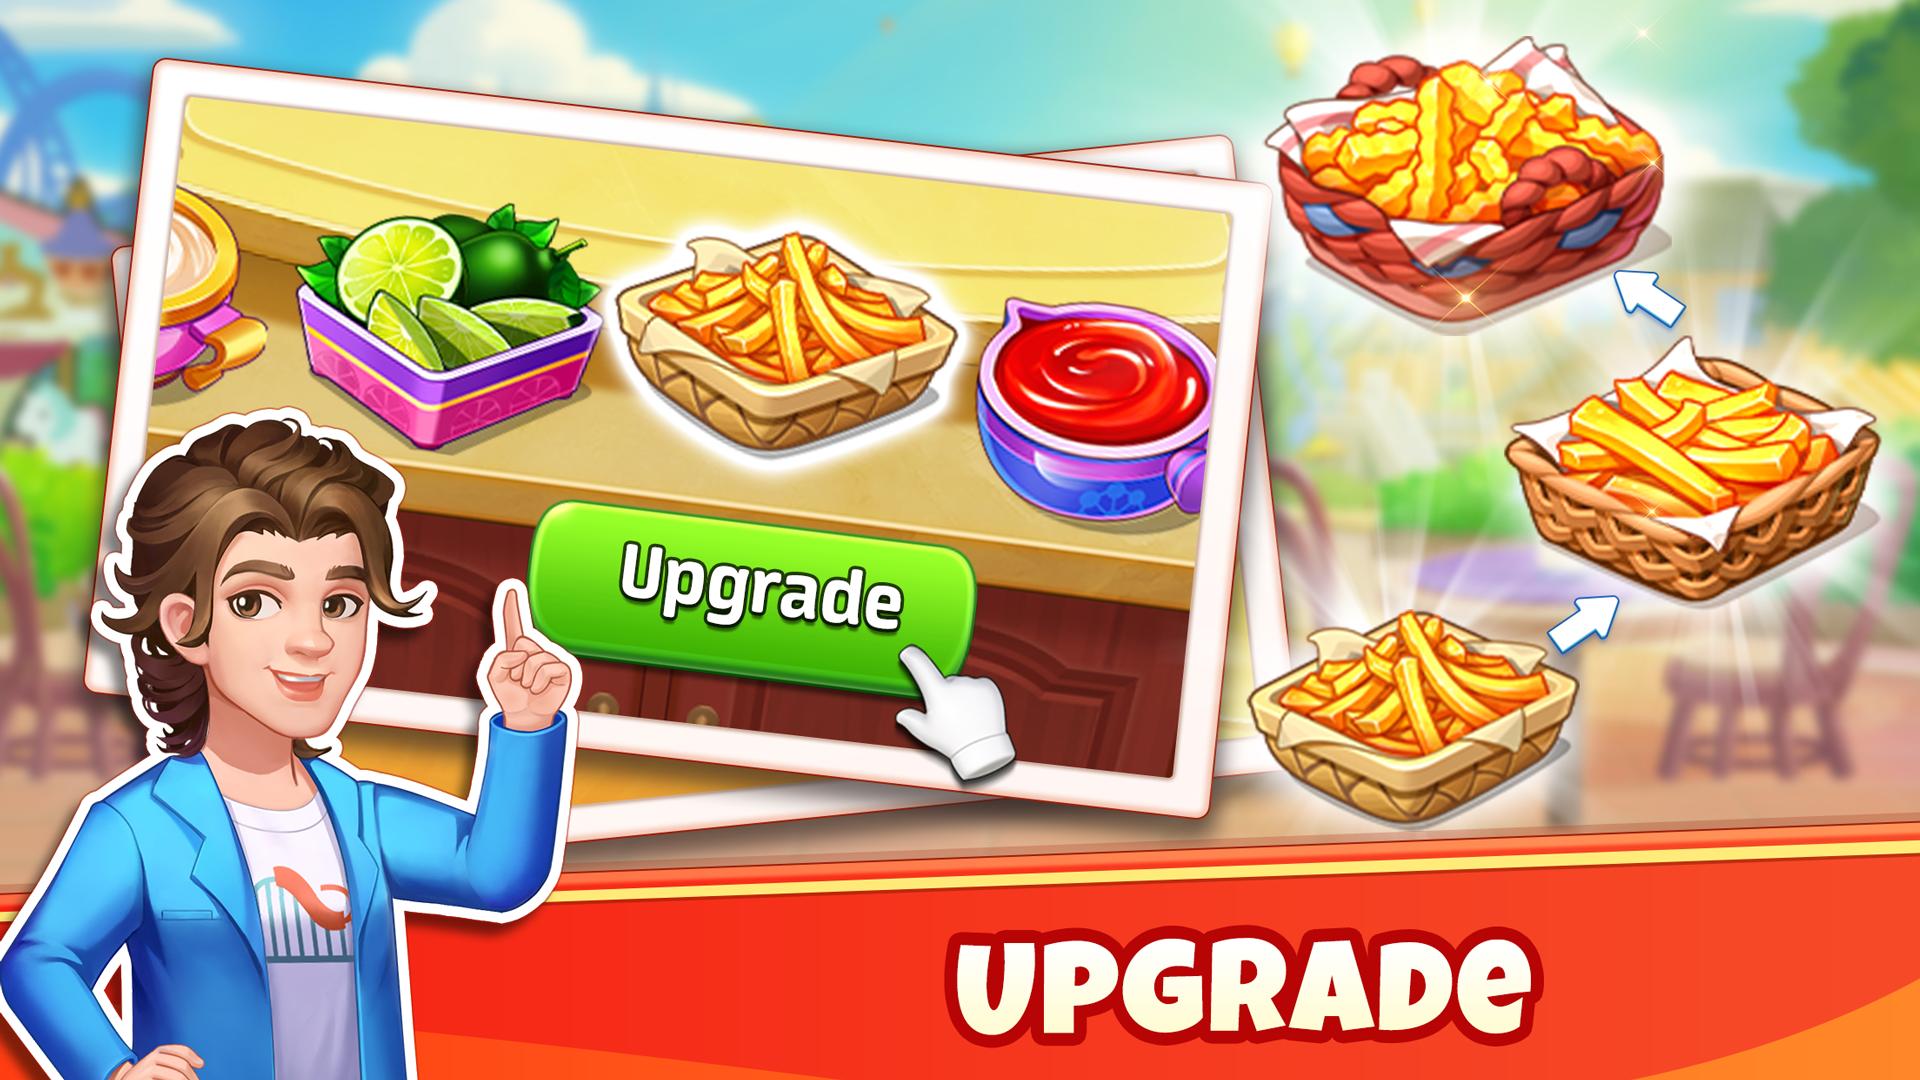 Cooking 2023 игра. Merge Cooking. Цепочки в игре merge Cooking. Merge Cooking продукты. Merge cooking theme